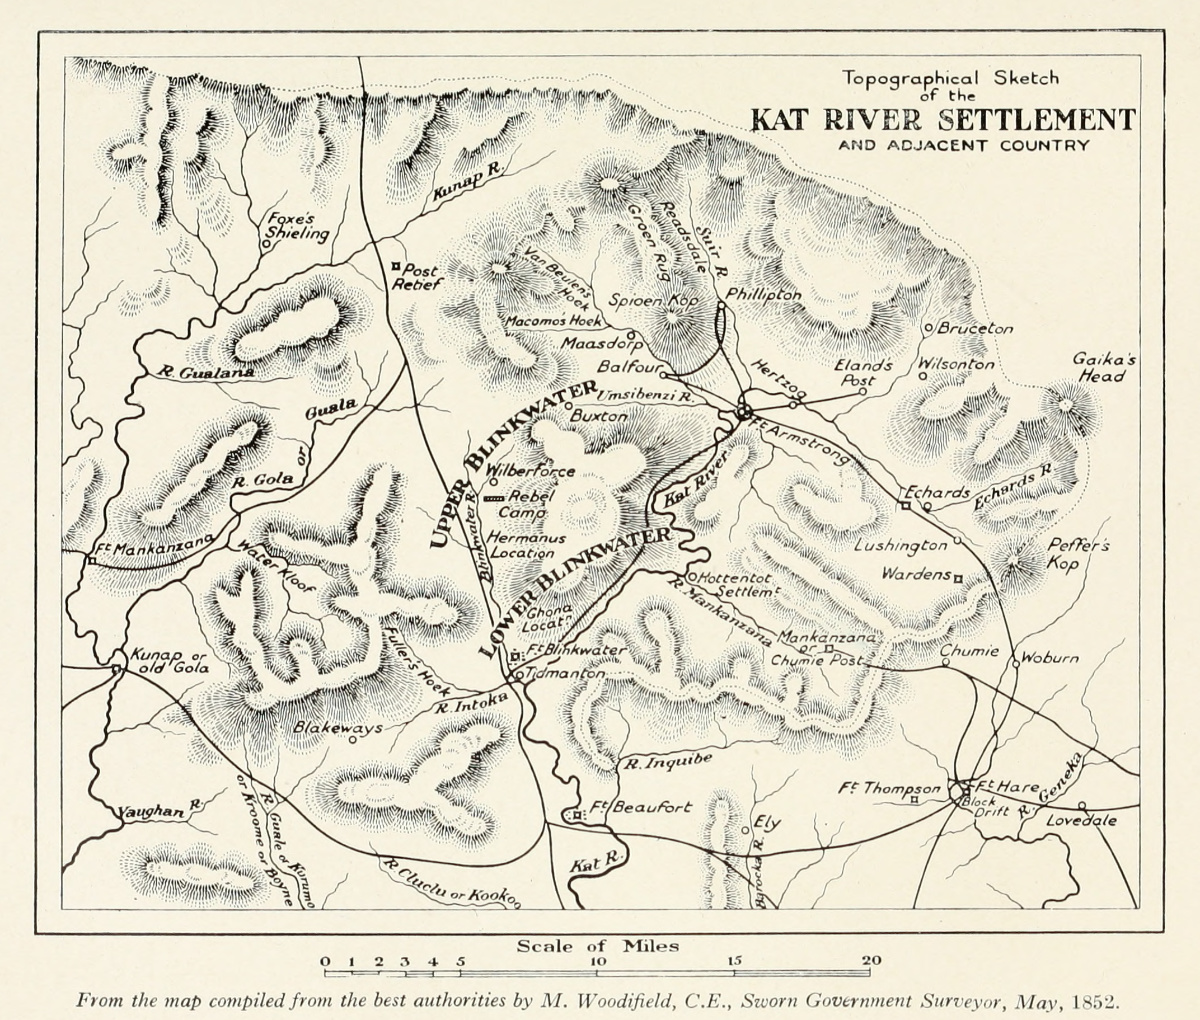 Topographical Sketch of the Kat River Settlement and Adjacent Country. From the Map Compiled From the Best Authorities by M. Woodifield, C. E., Sworn Government Surveyor, May, 1852. Illustration from Geo. E. Cory, The Rise of South Africa: A History of the Origin of South African Colonisation and its Development Towards the East from the Earliest Times to 1857, 6 vols (London: Longmans, Green and Co., 1930), 5:opposite 326. Courtesy of the Internet Archive (https://archive.org/details/riseofsouthafric05coryuoft).